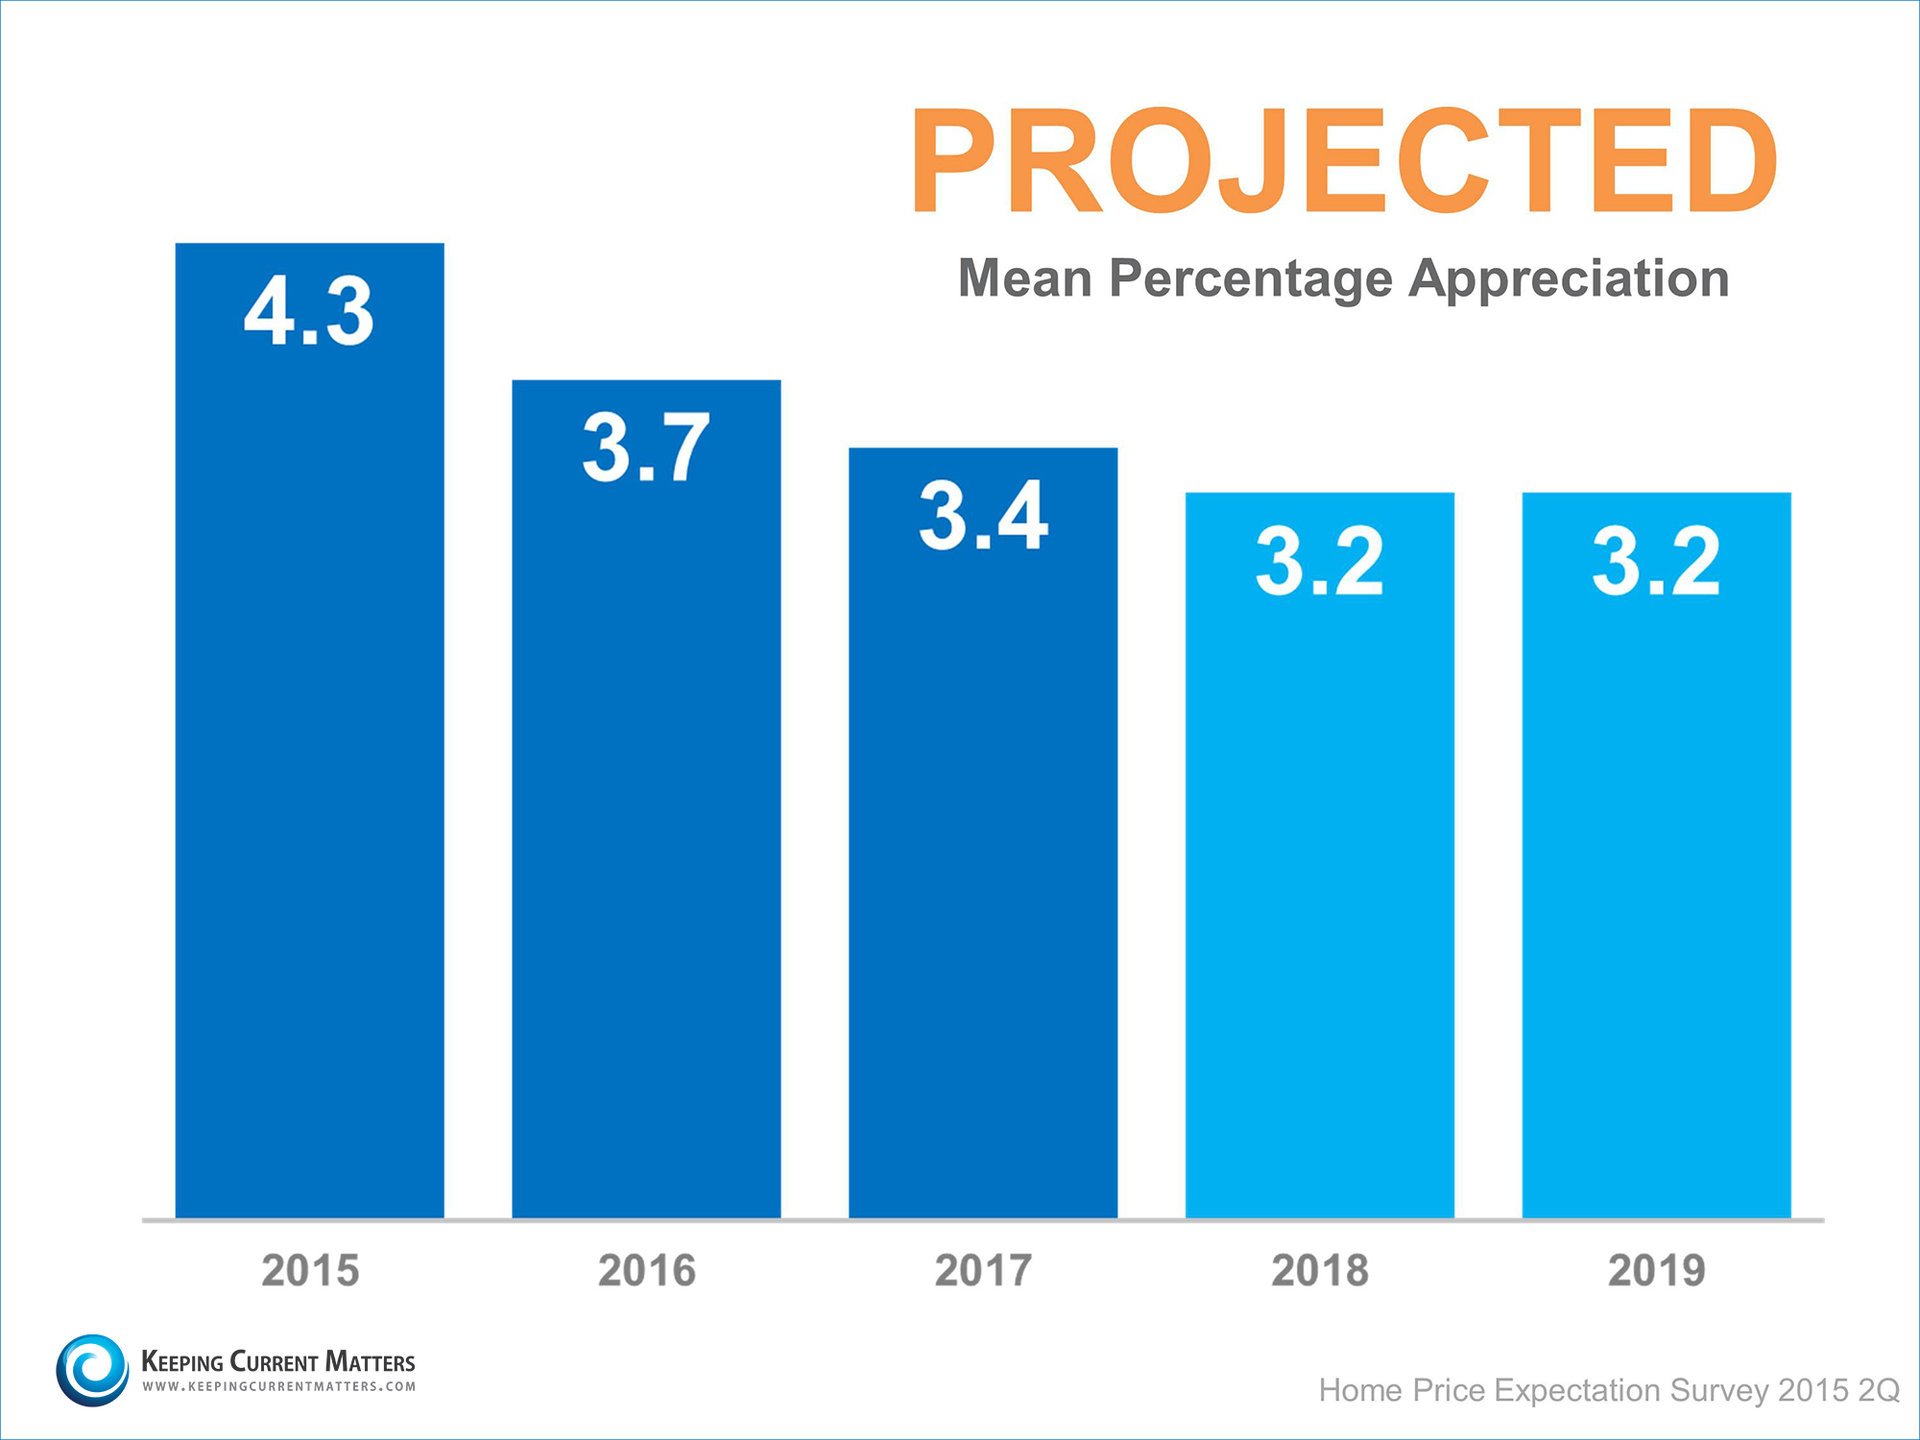 Projected Mean Percentage Appreciation | Keeping Current Matters